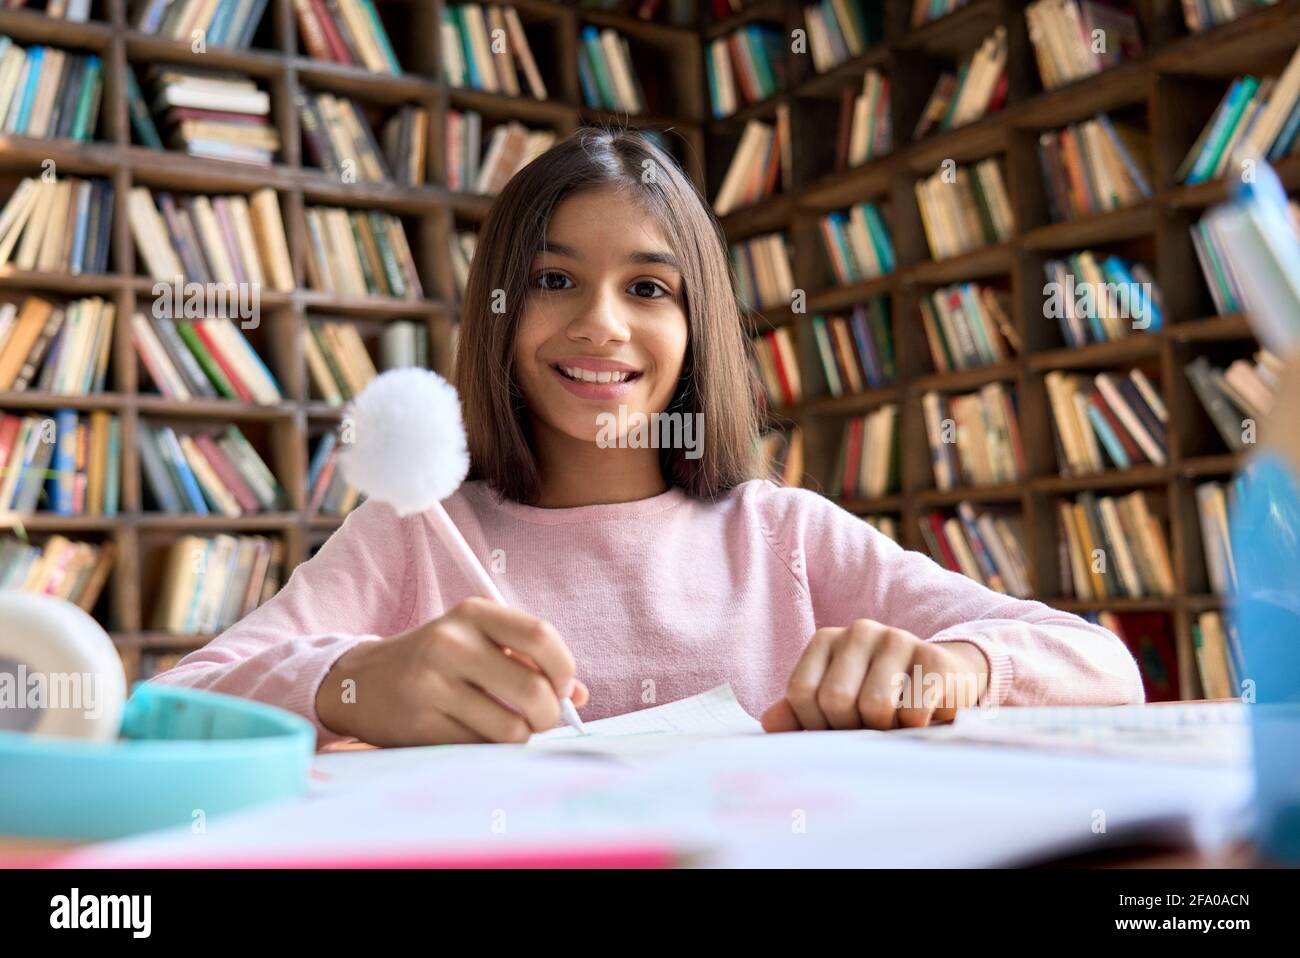 Portrait of happy Mexican teen student girl sitting at table camera looking. Stock Photo